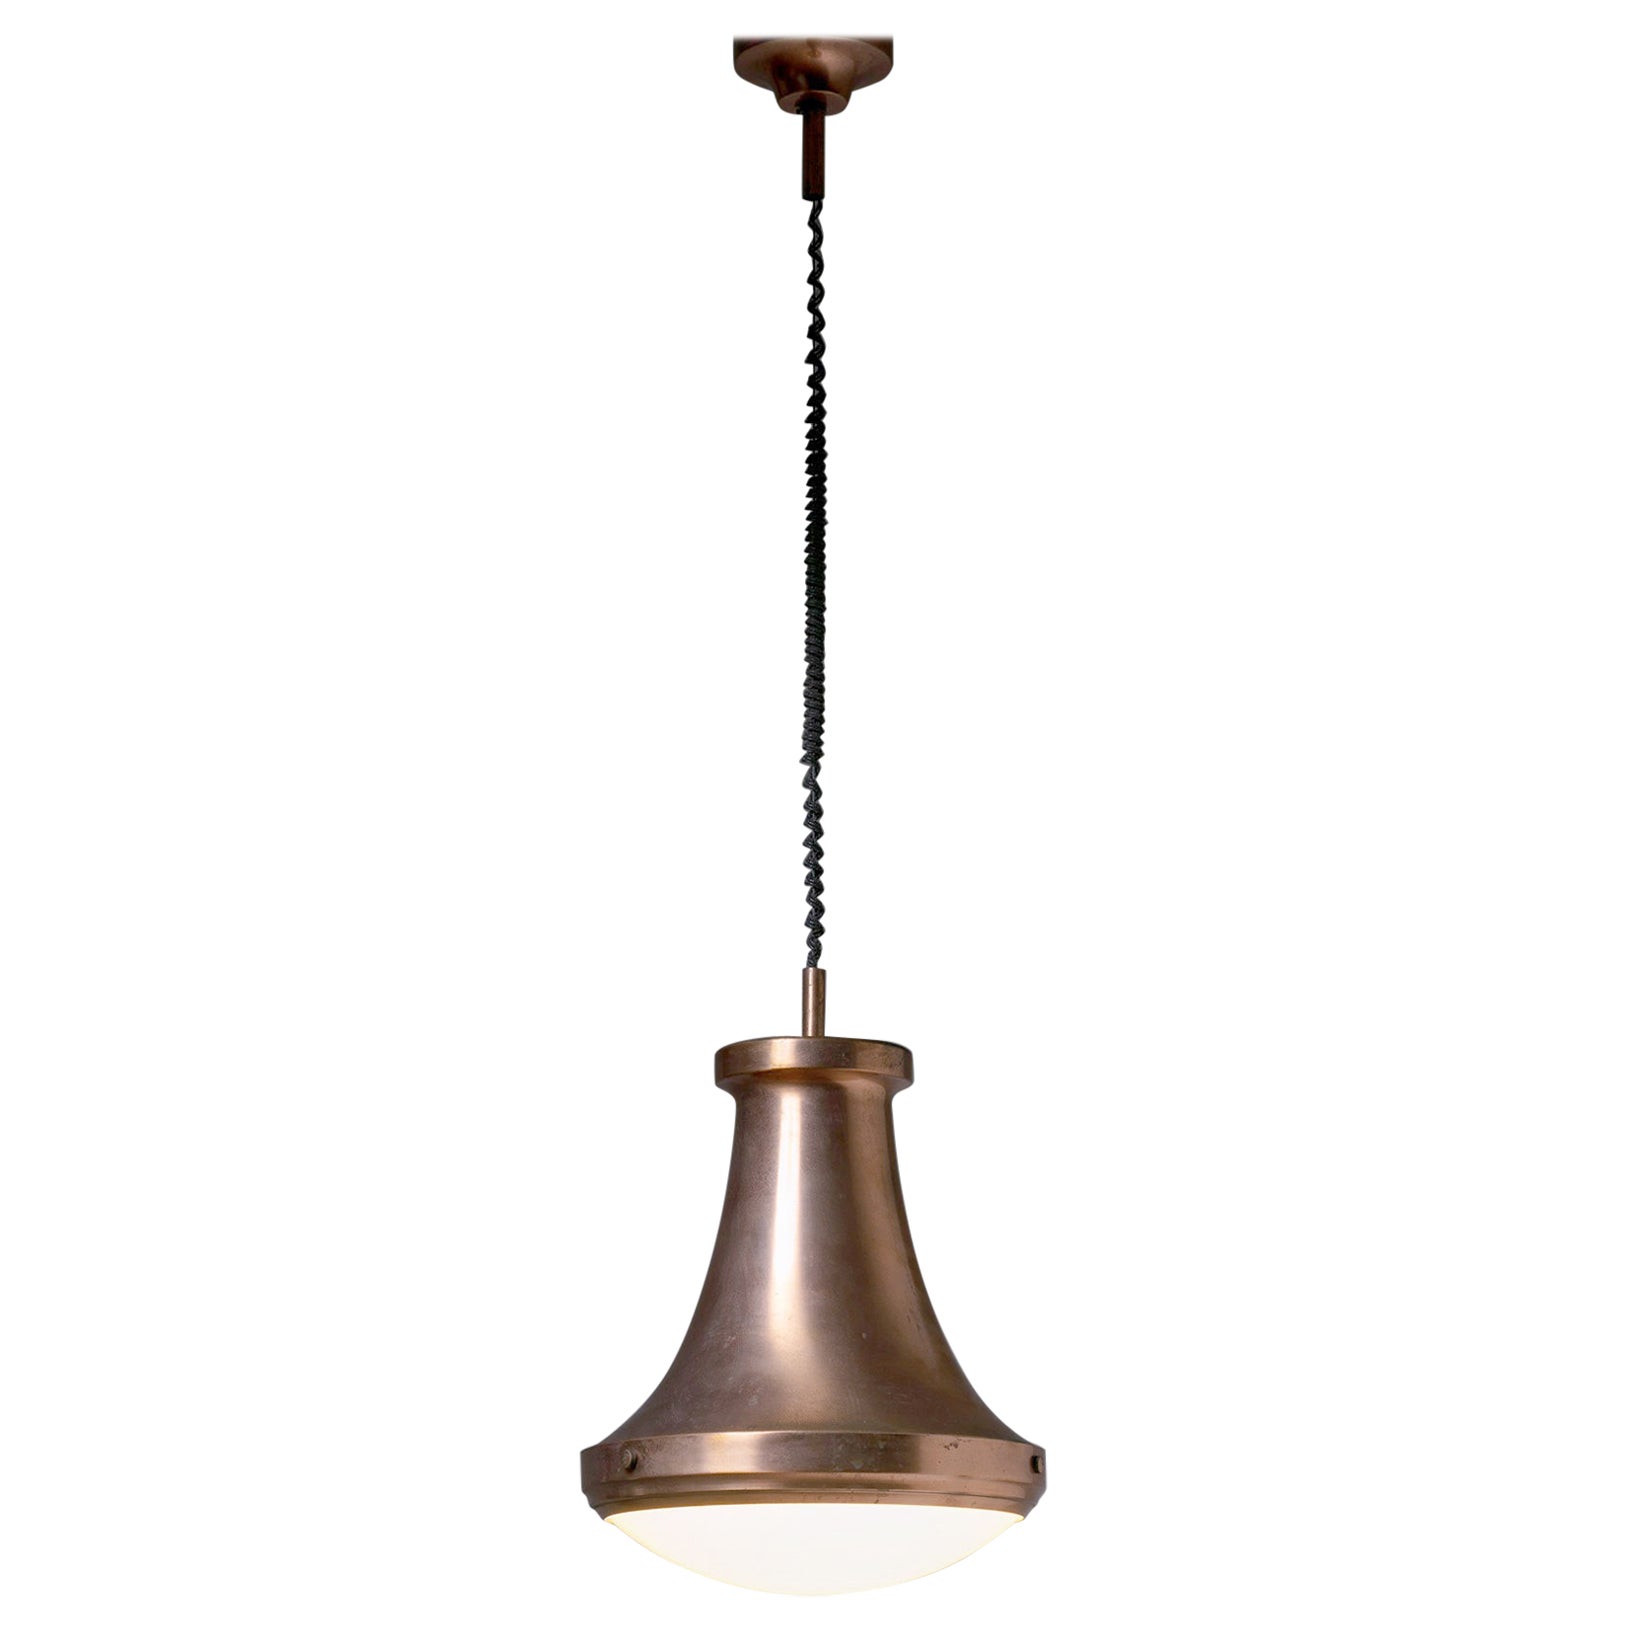 Copper Pendant Lamp with Large Metal Body, Frosted Glass Shade, Italy, 1960s